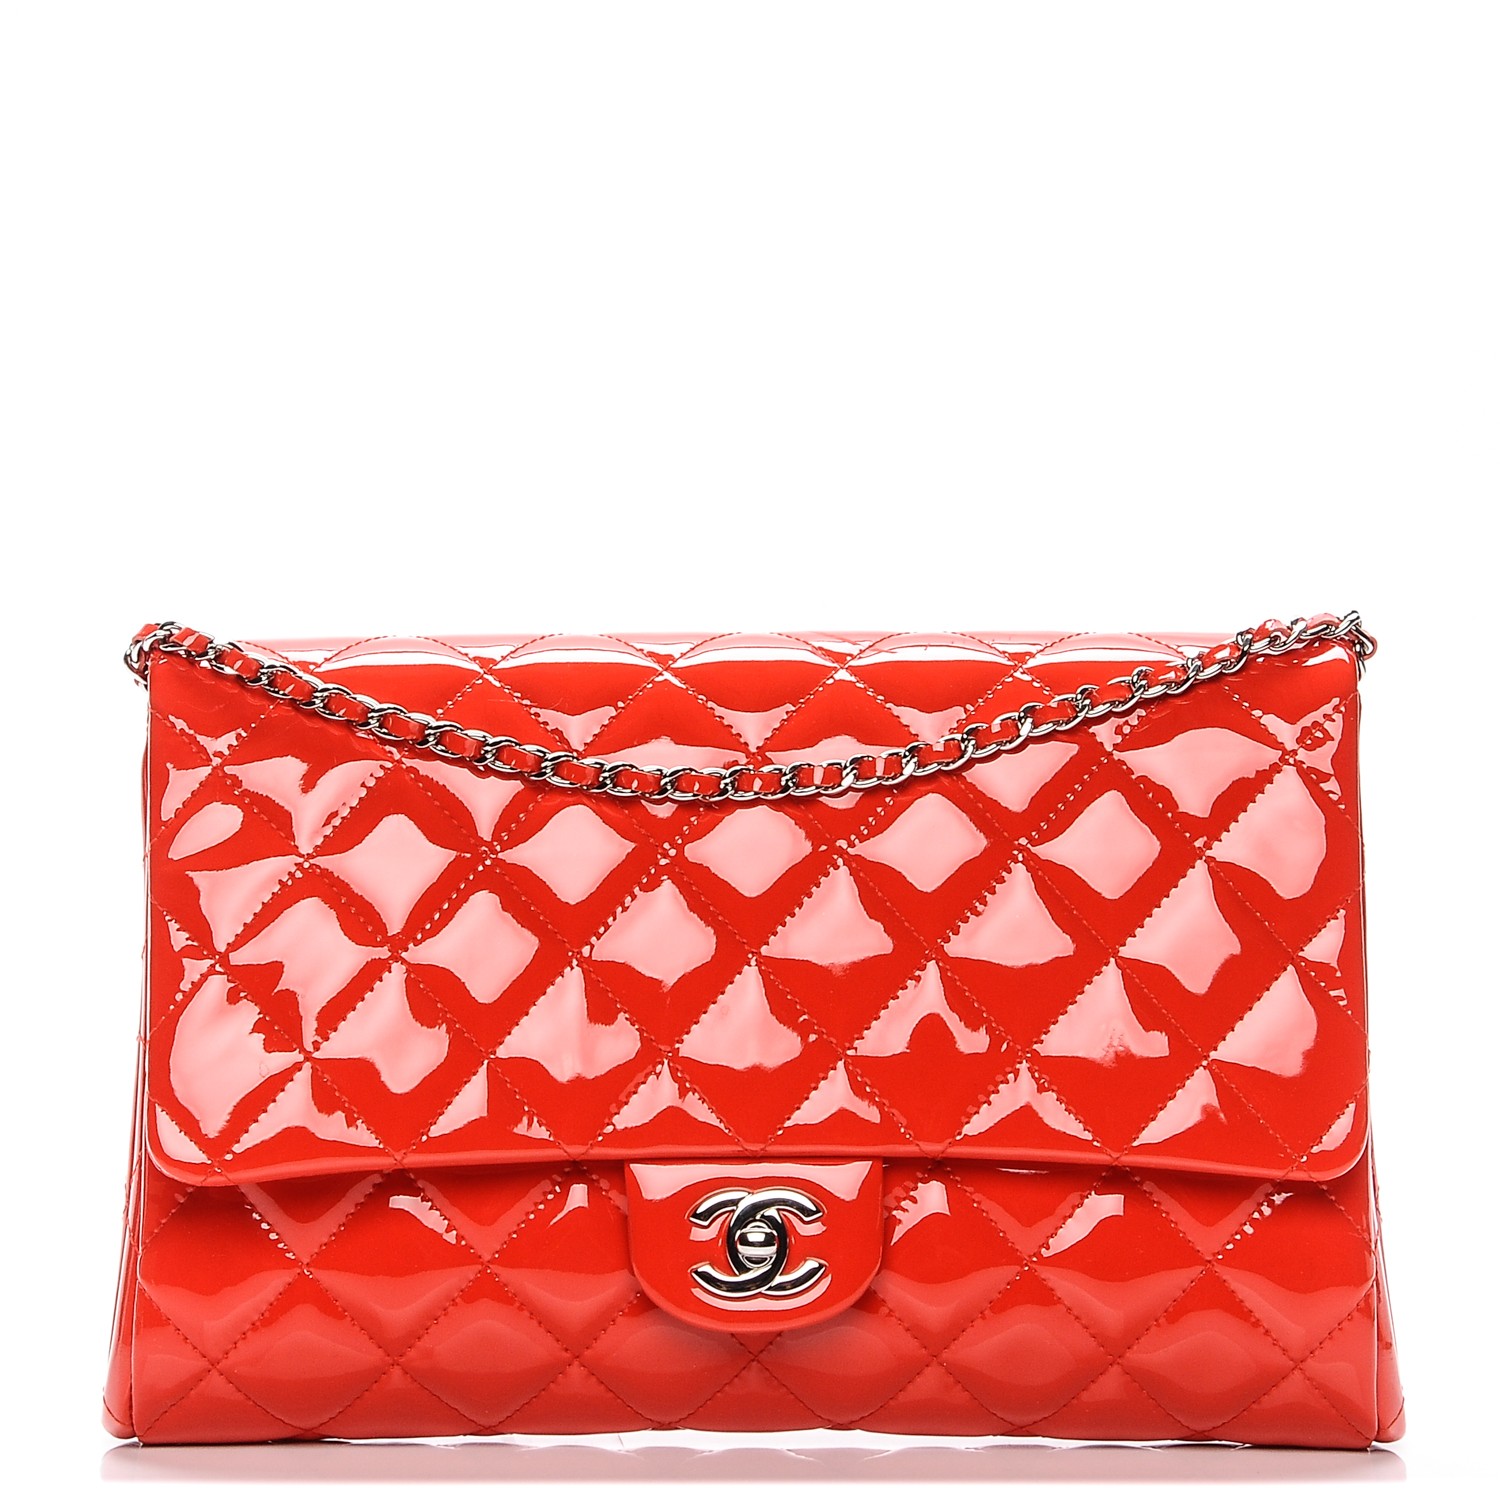 CHANEL Patent Quilted Clutch with Chain Flap Red 190900